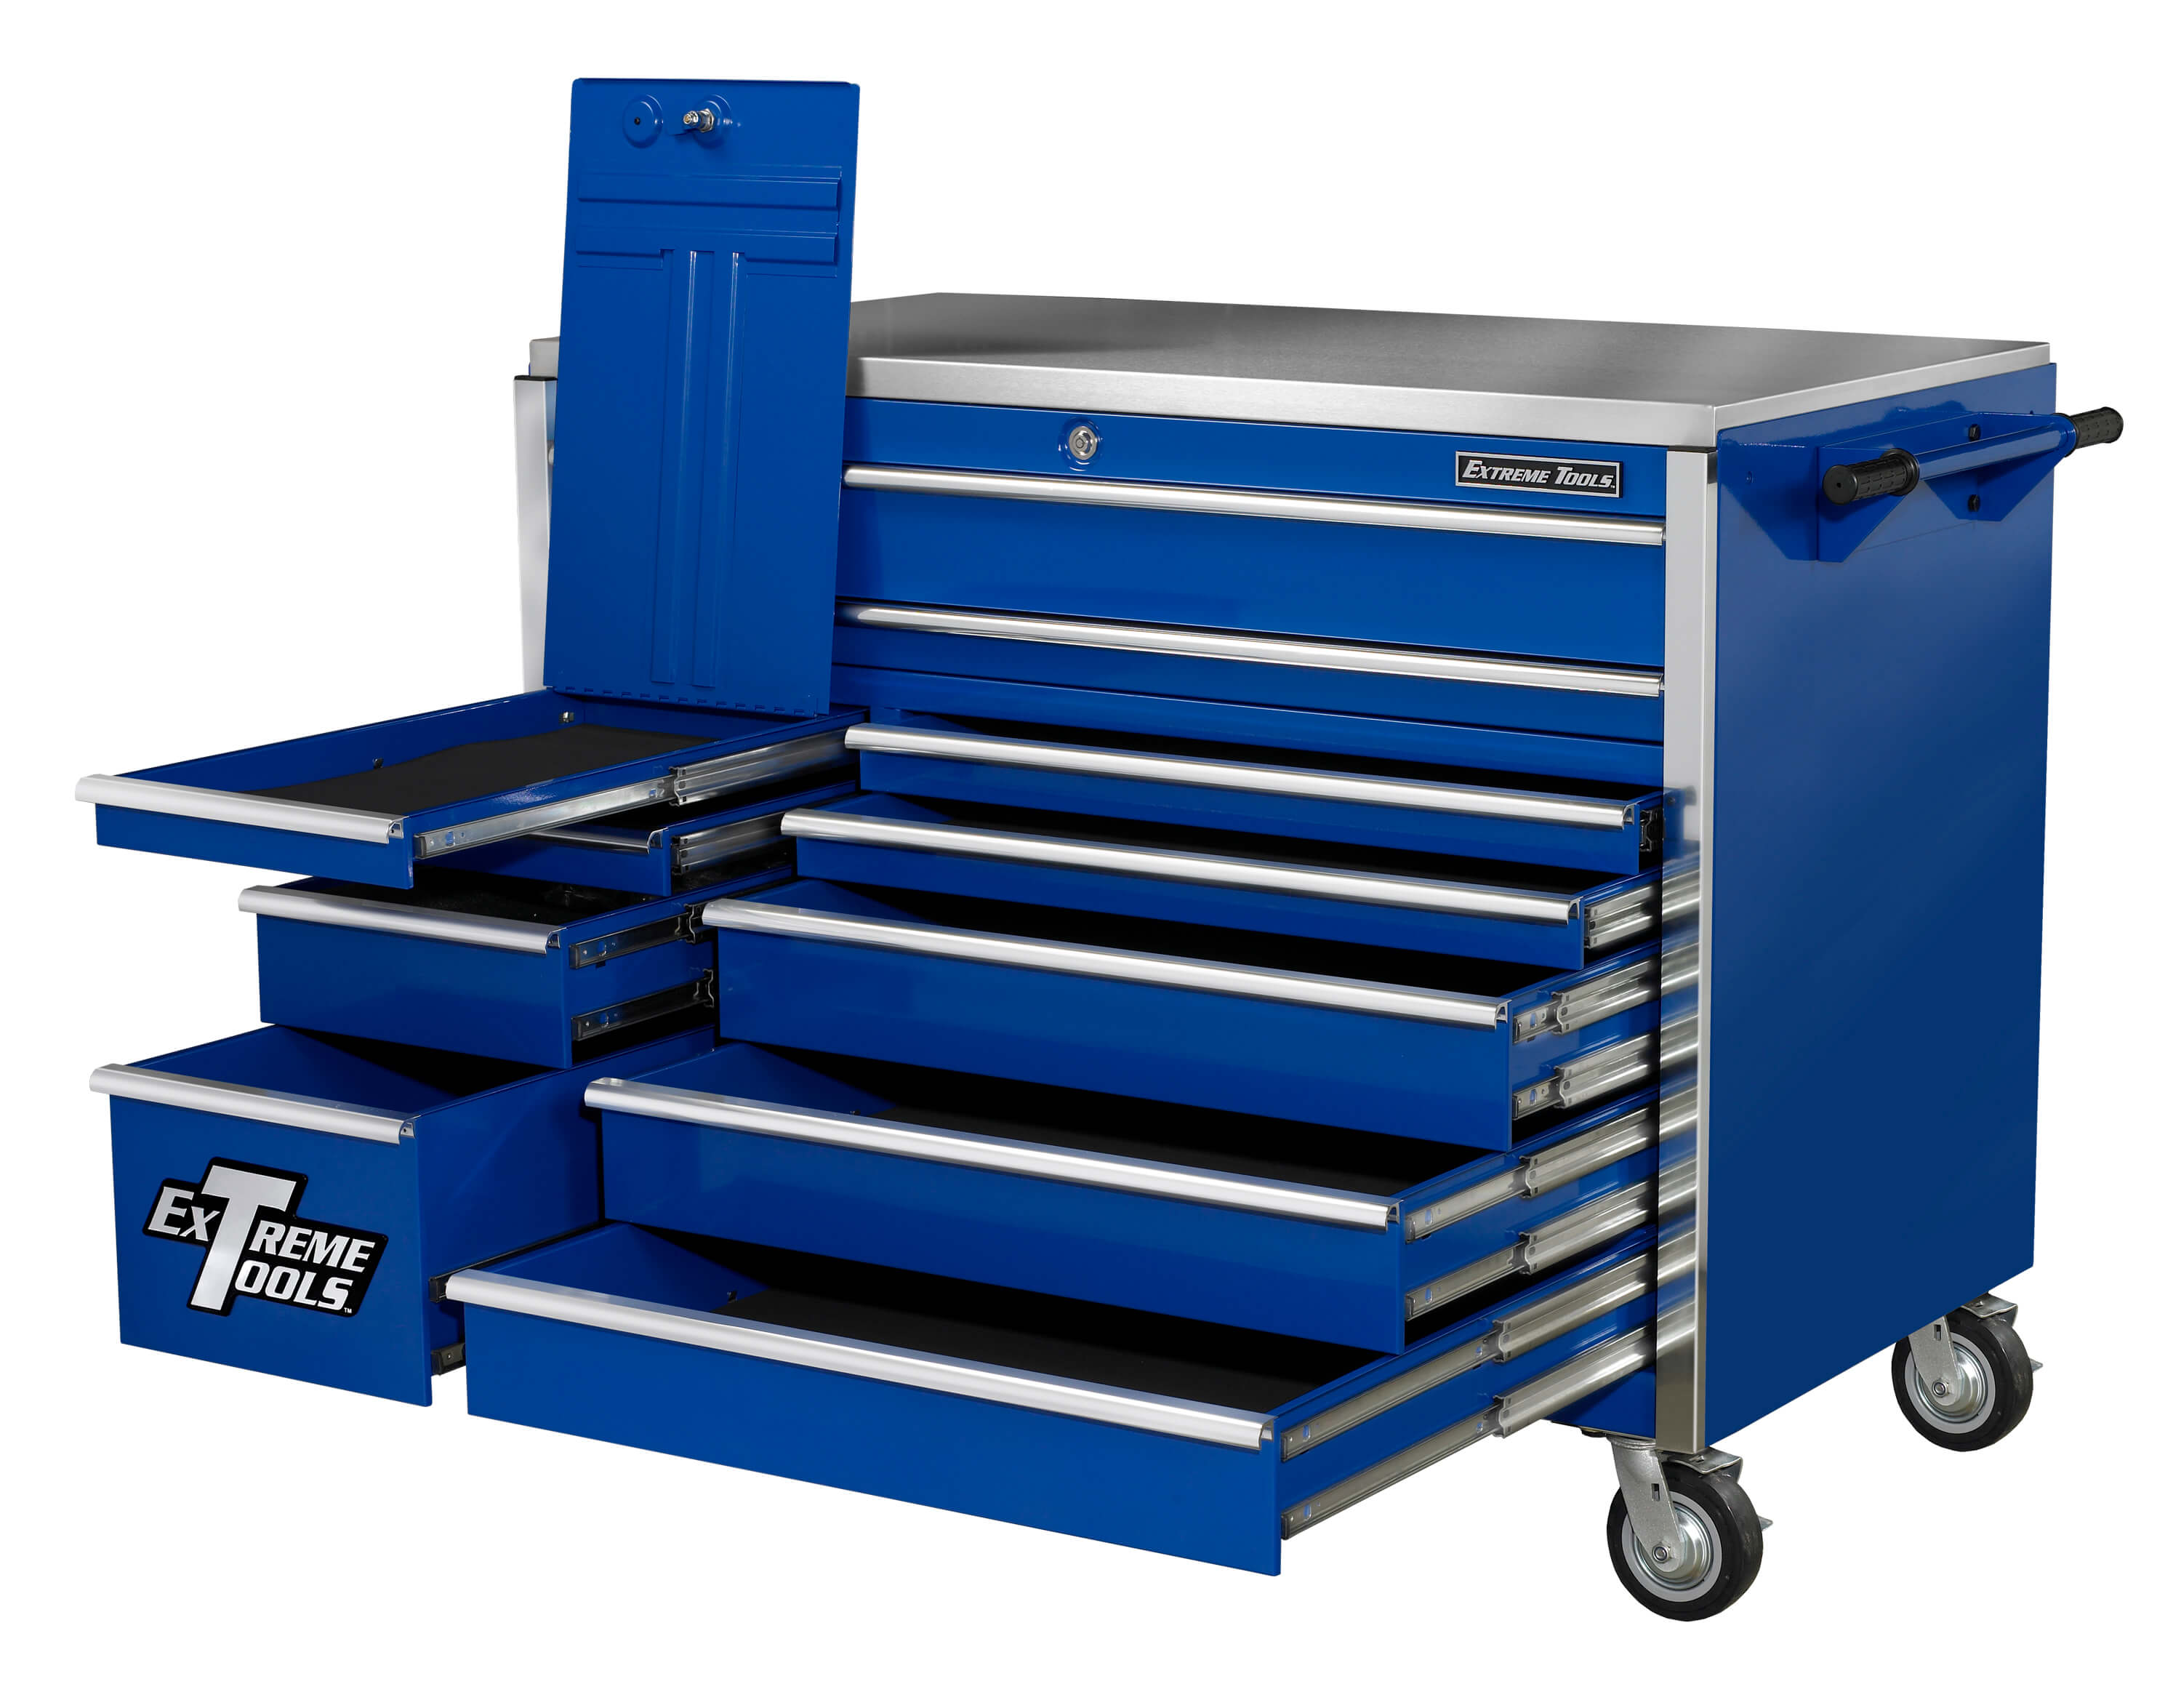 Extreme Tools 55” 11 Drawer Professional Roller Cabinet